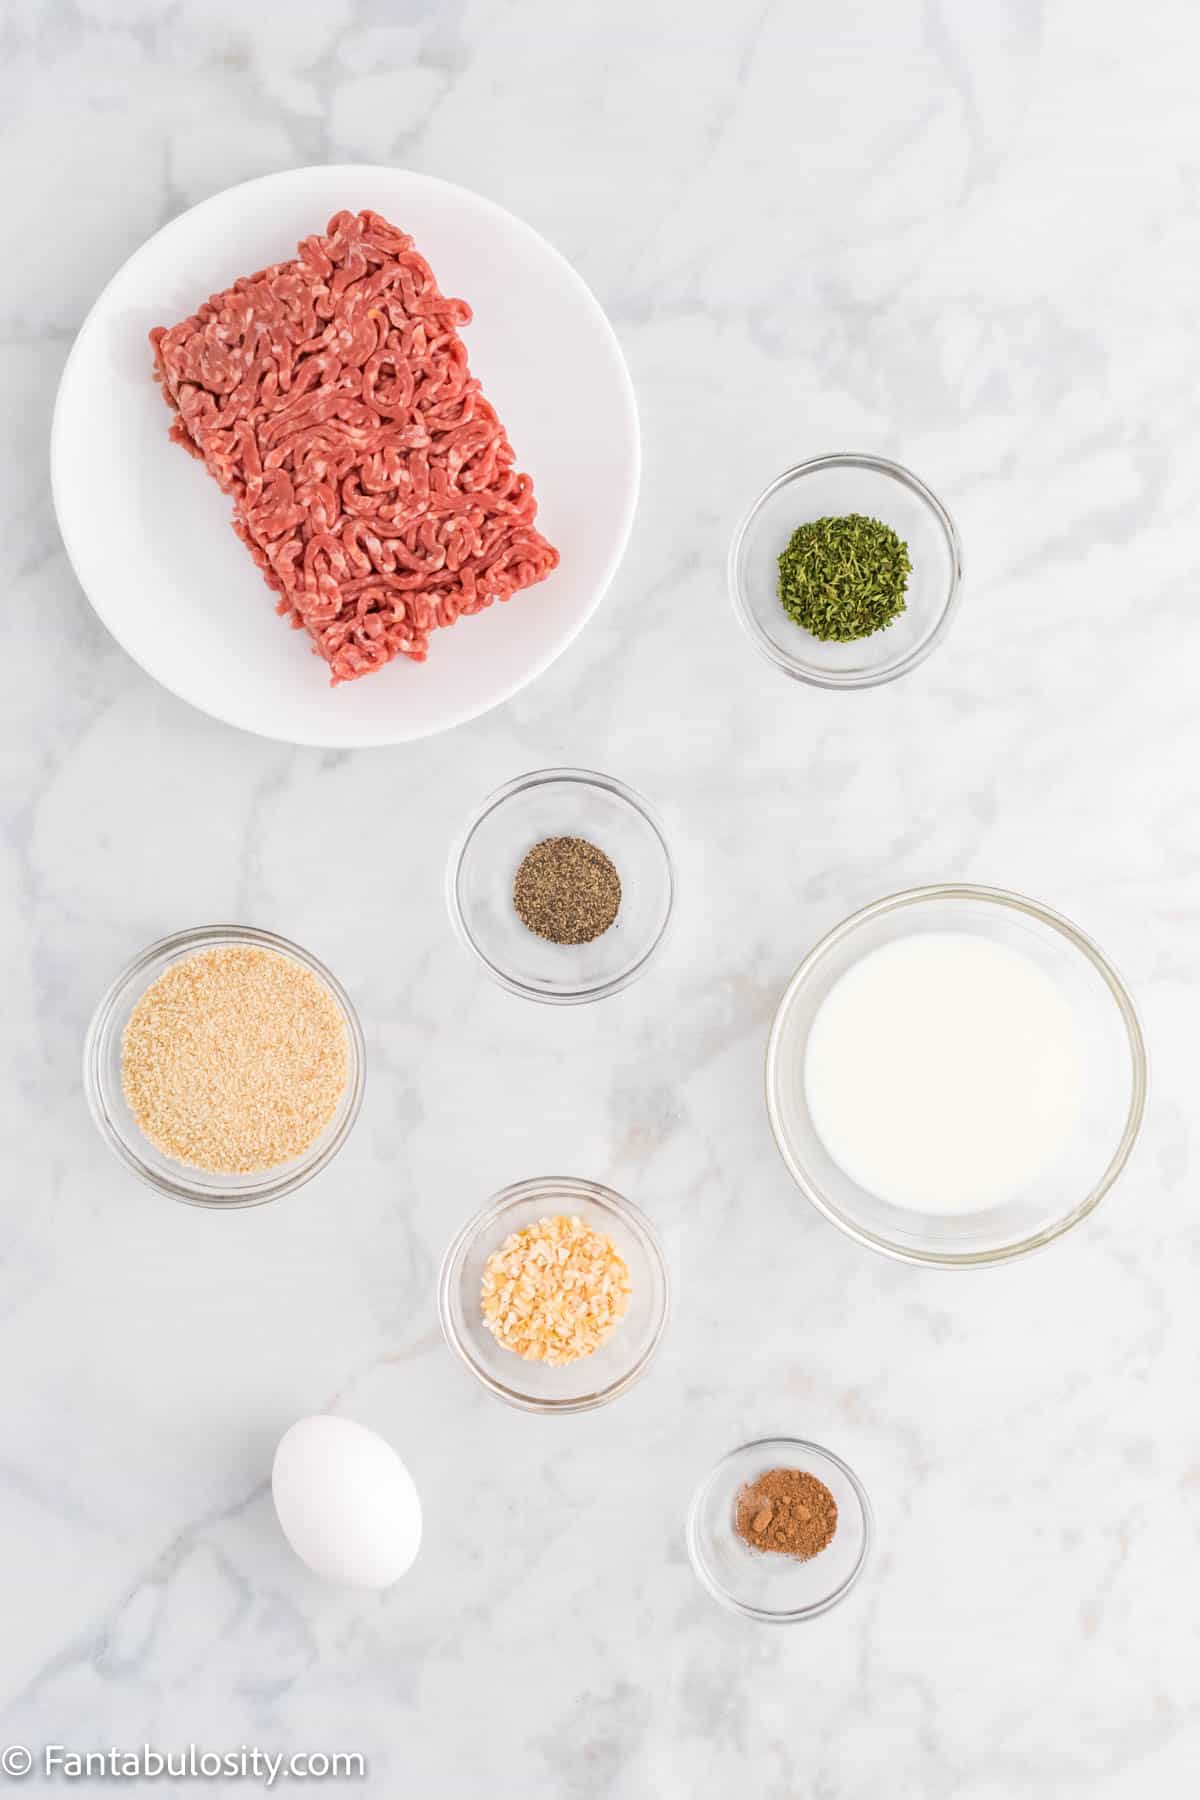 Ground beef, an egg, bowls of spices and milk are displayed on a white marble background